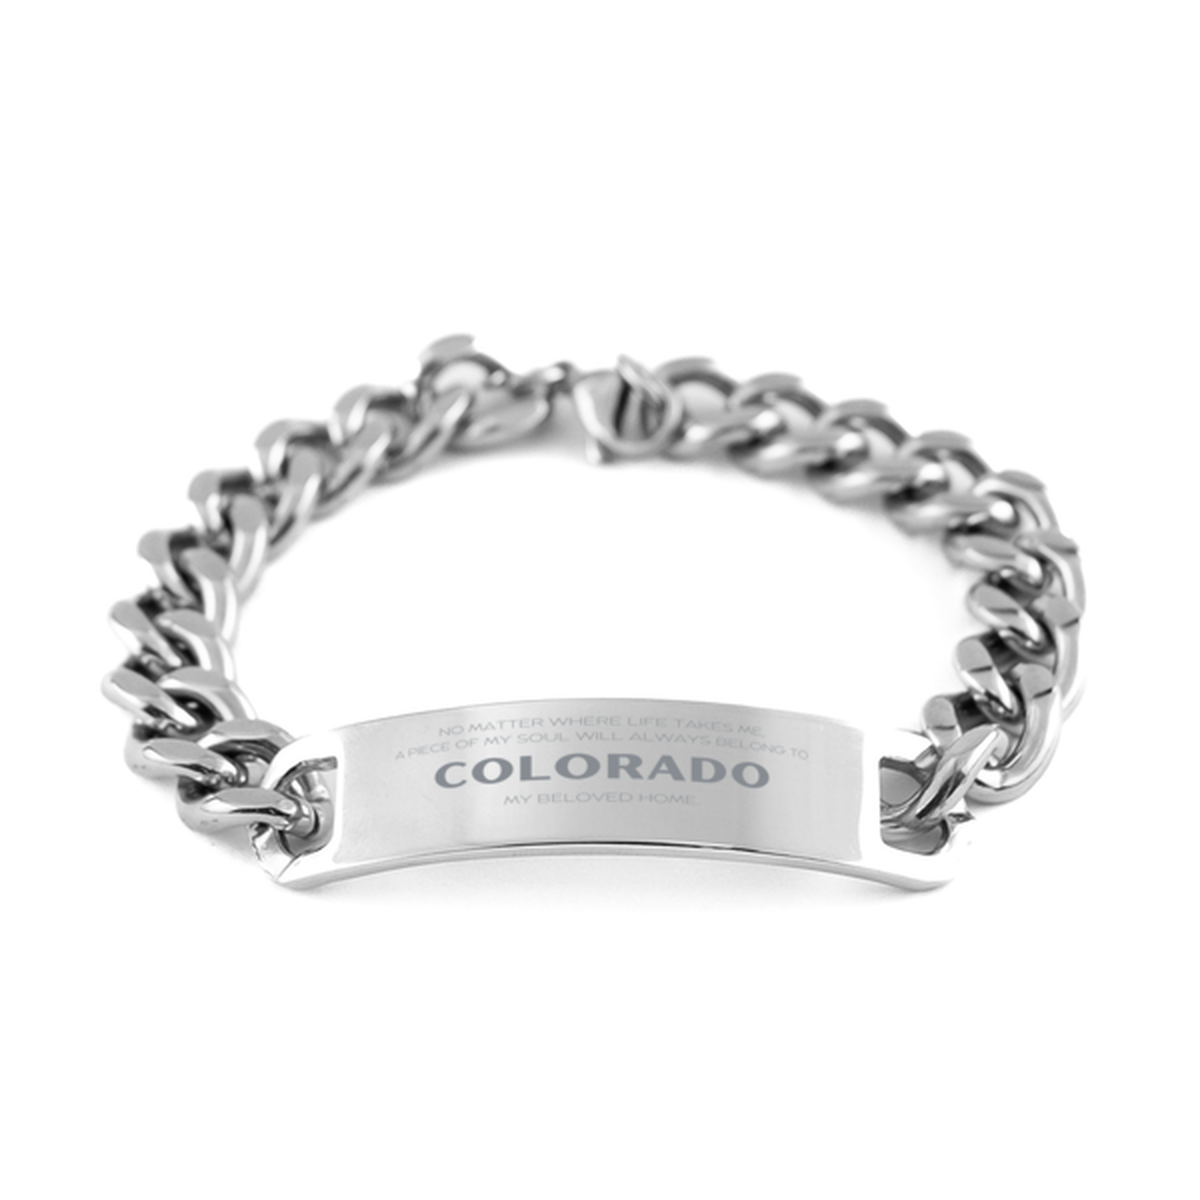 Love Colorado State Gifts, My soul will always belong to Colorado, Proud Cuban Chain Stainless Steel Bracelet, Birthday Unique Gifts For Colorado Men, Women, Friends